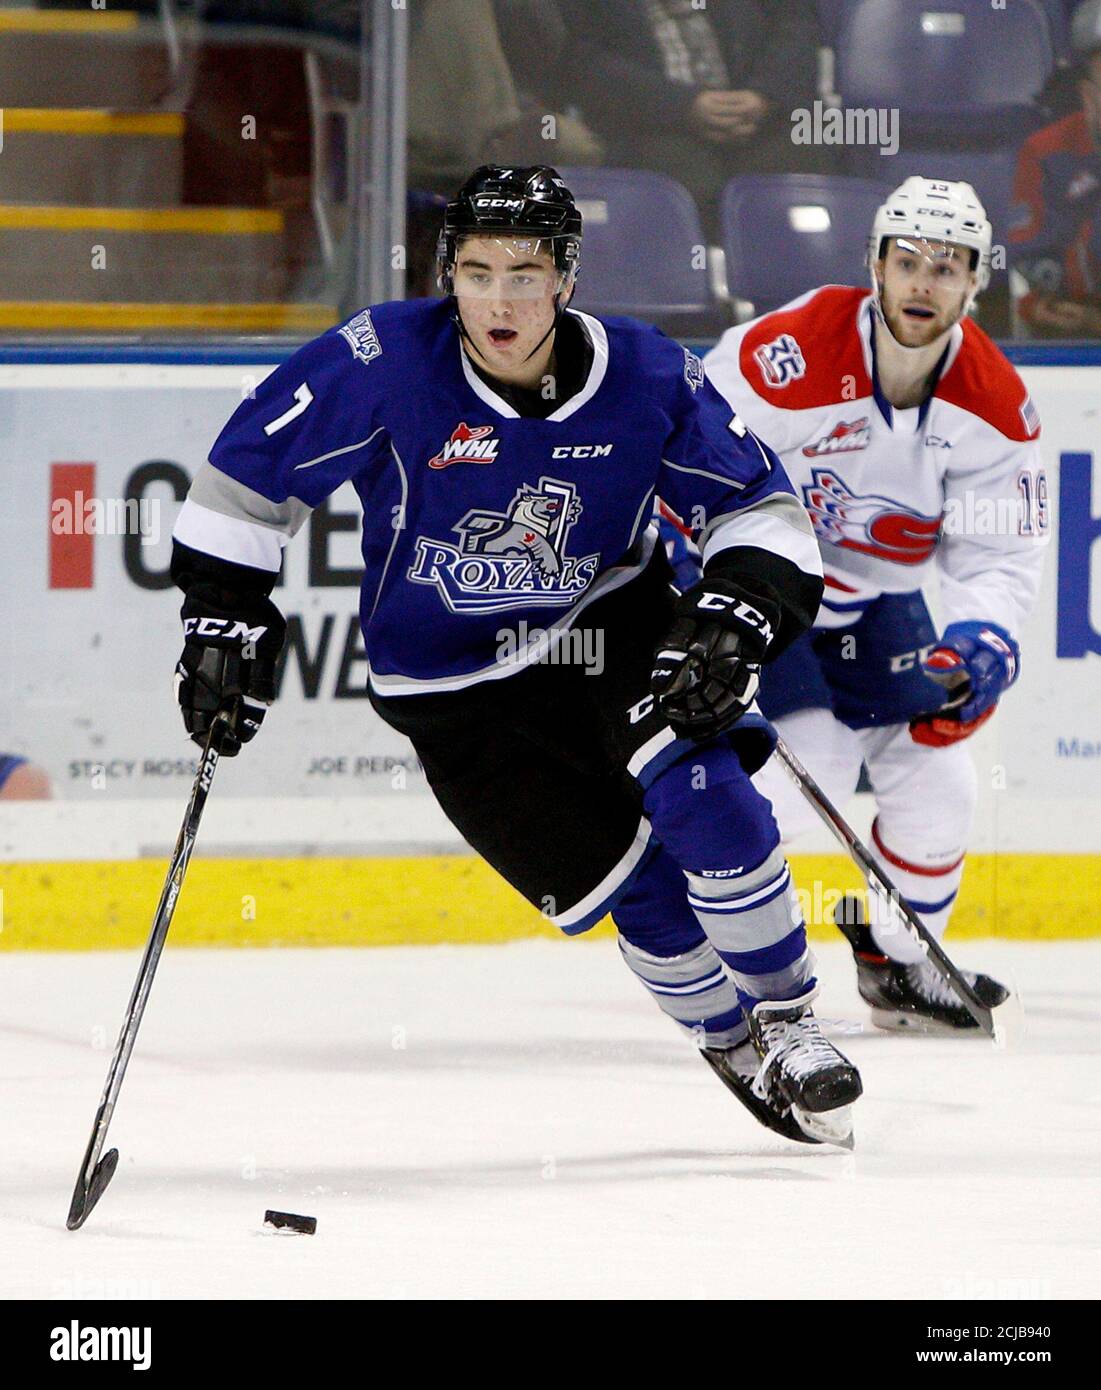 Defenceman Scott Walford of the Western Hockey League team Victoria Royals  passes a Spokane Chiefs player